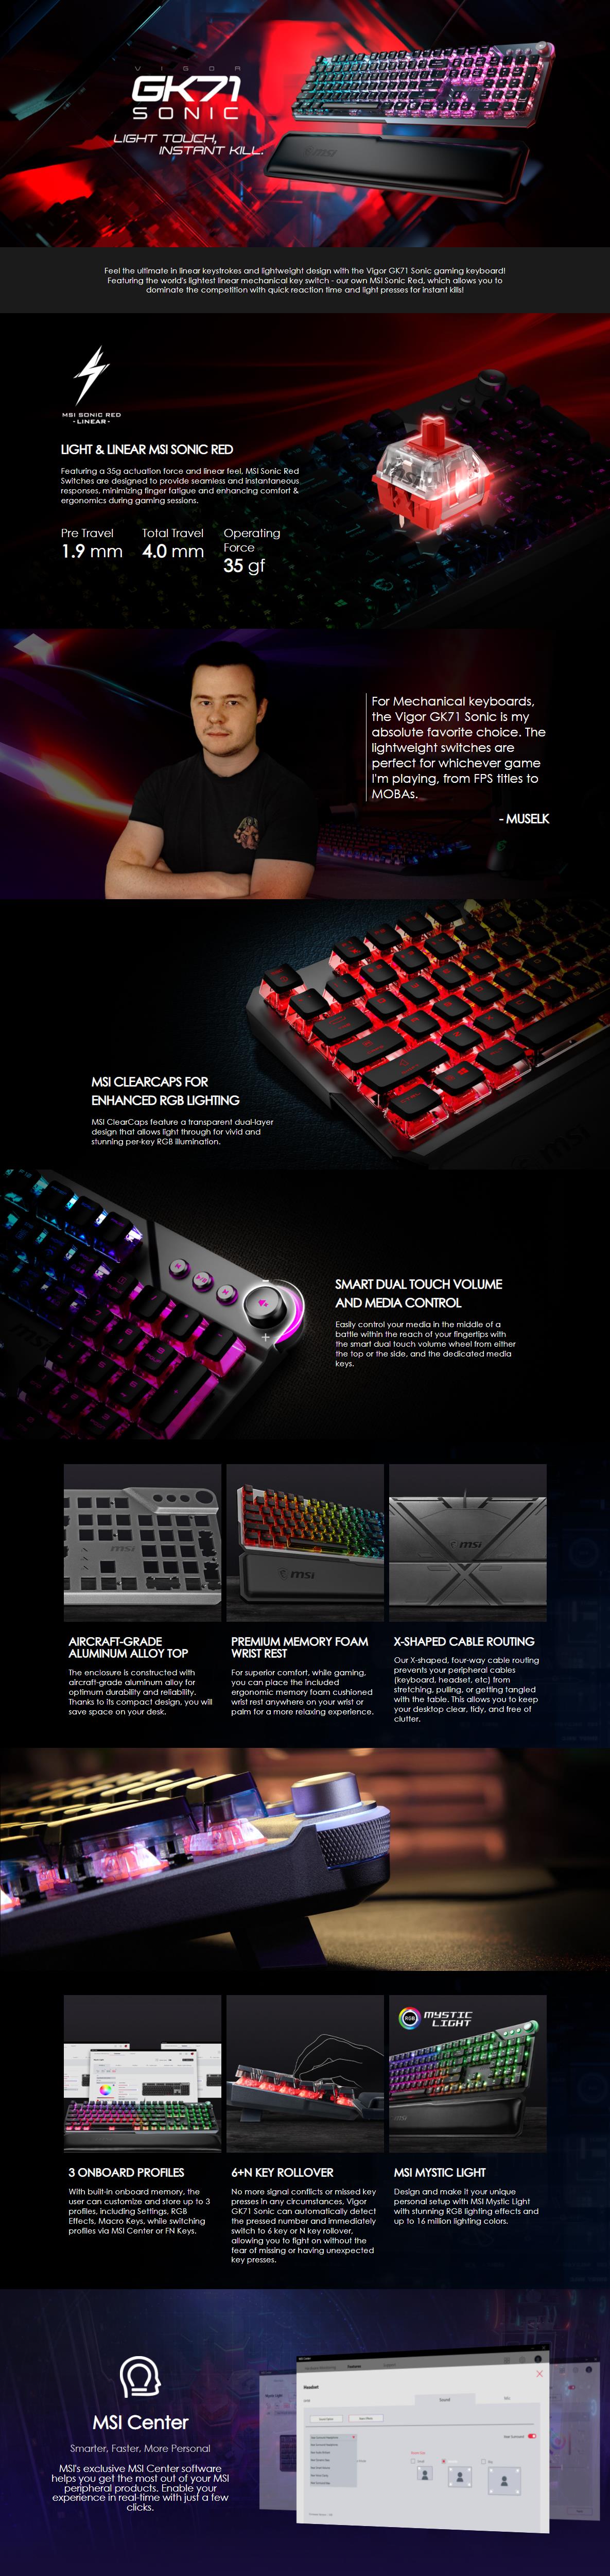 A large marketing image providing additional information about the product MSI Vigor GK71 Sonic RGB Mechanical Gaming Keyboard - Red Switch - Additional alt info not provided